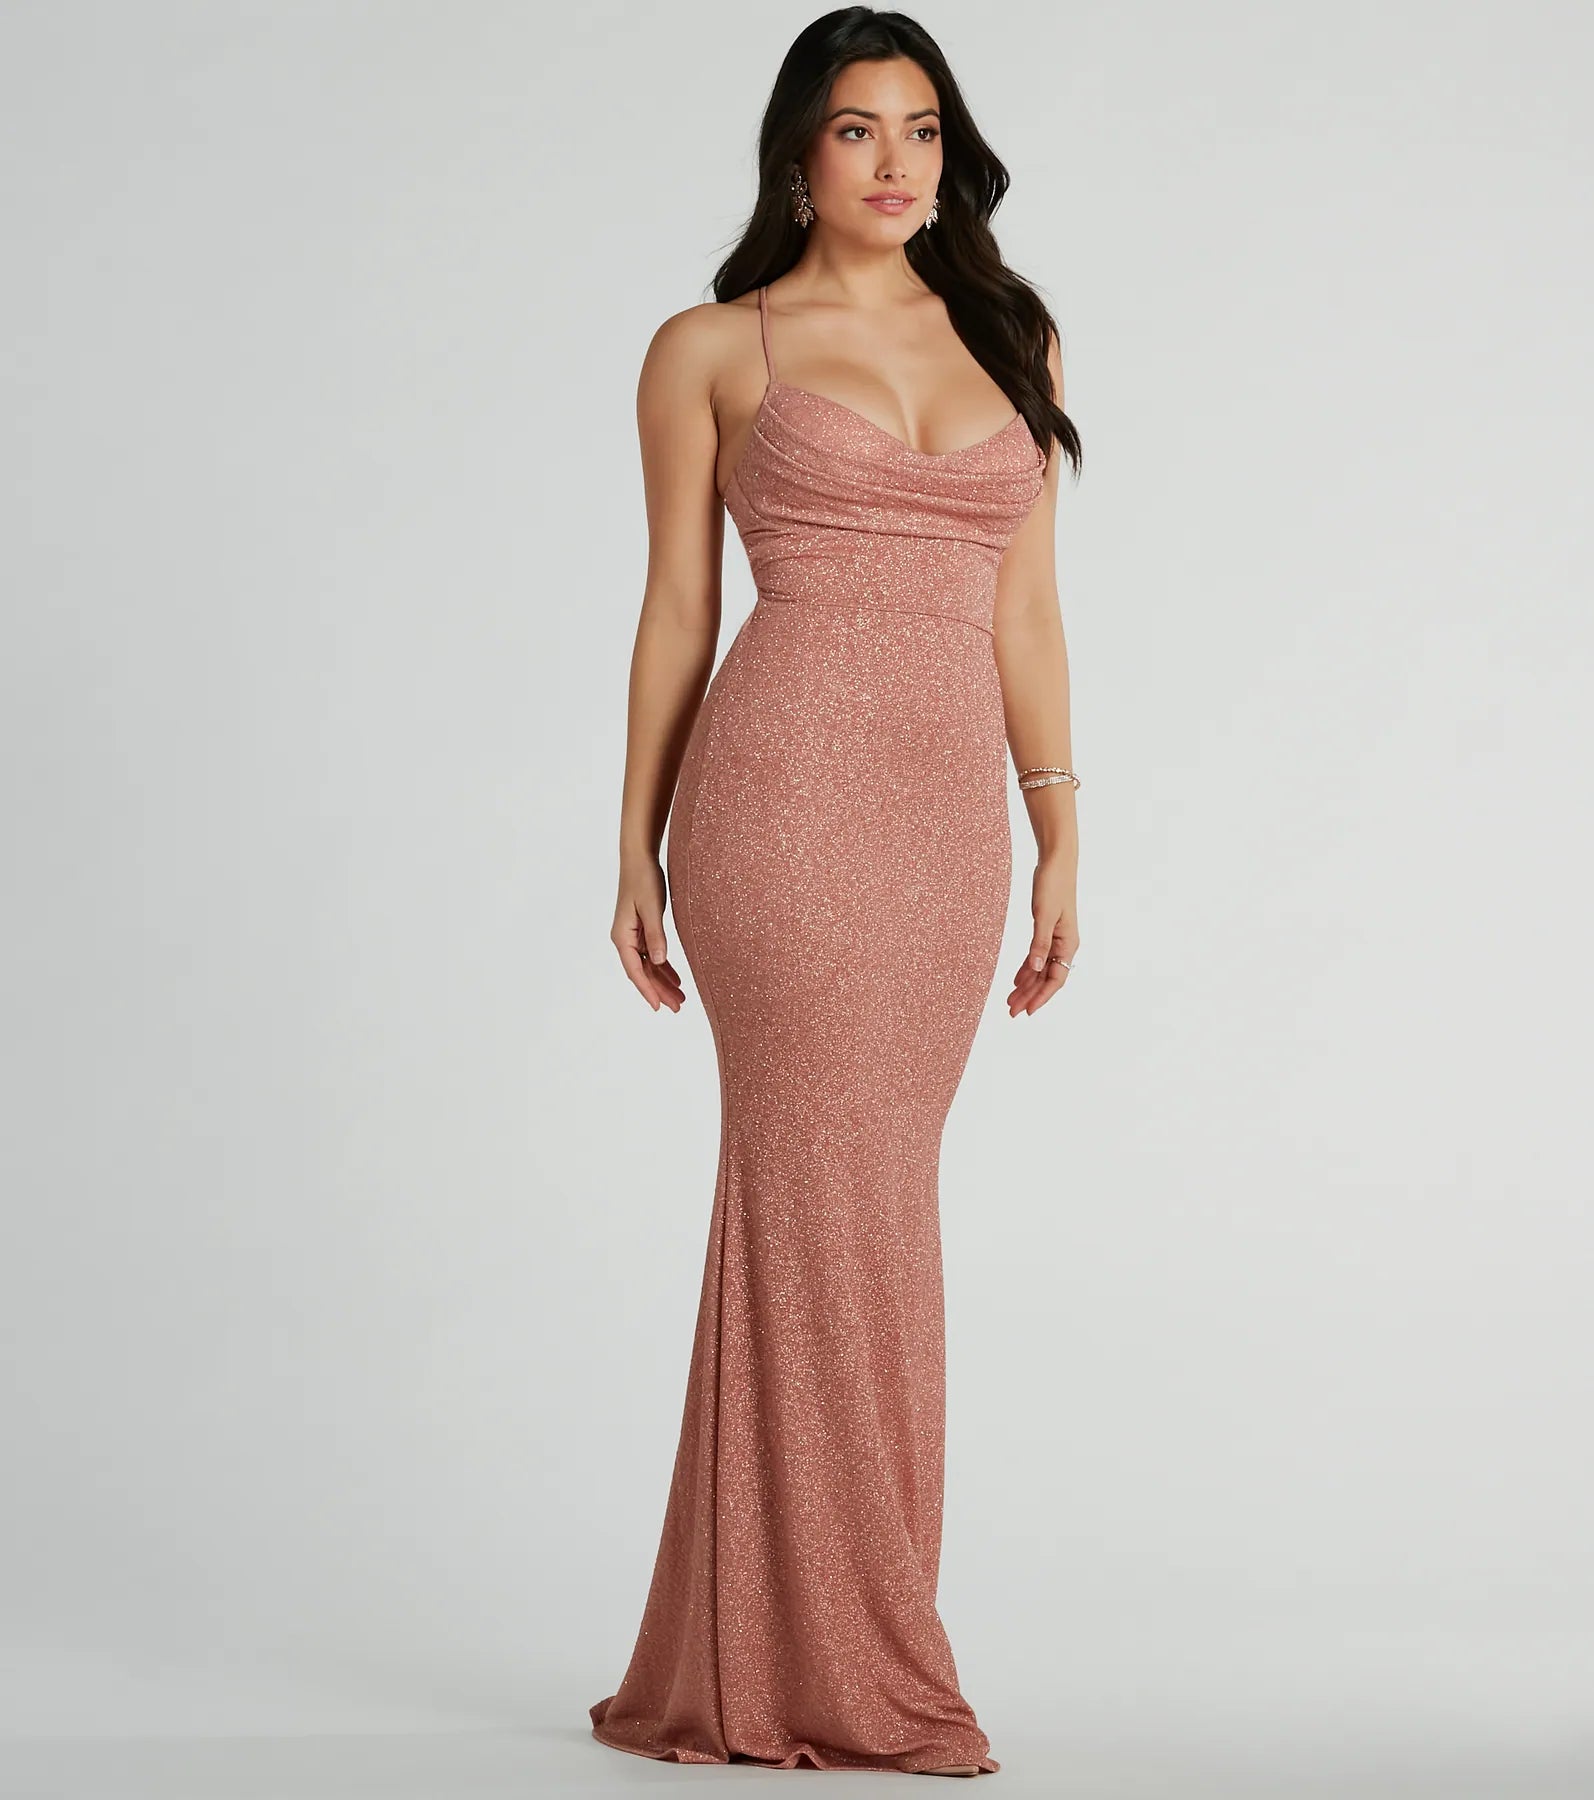 Sophisticated Cowl Neck Floor Length Spaghetti Strap Knit Mermaid Lace-Up Stretchy Glittering Prom Dress/Party Dress